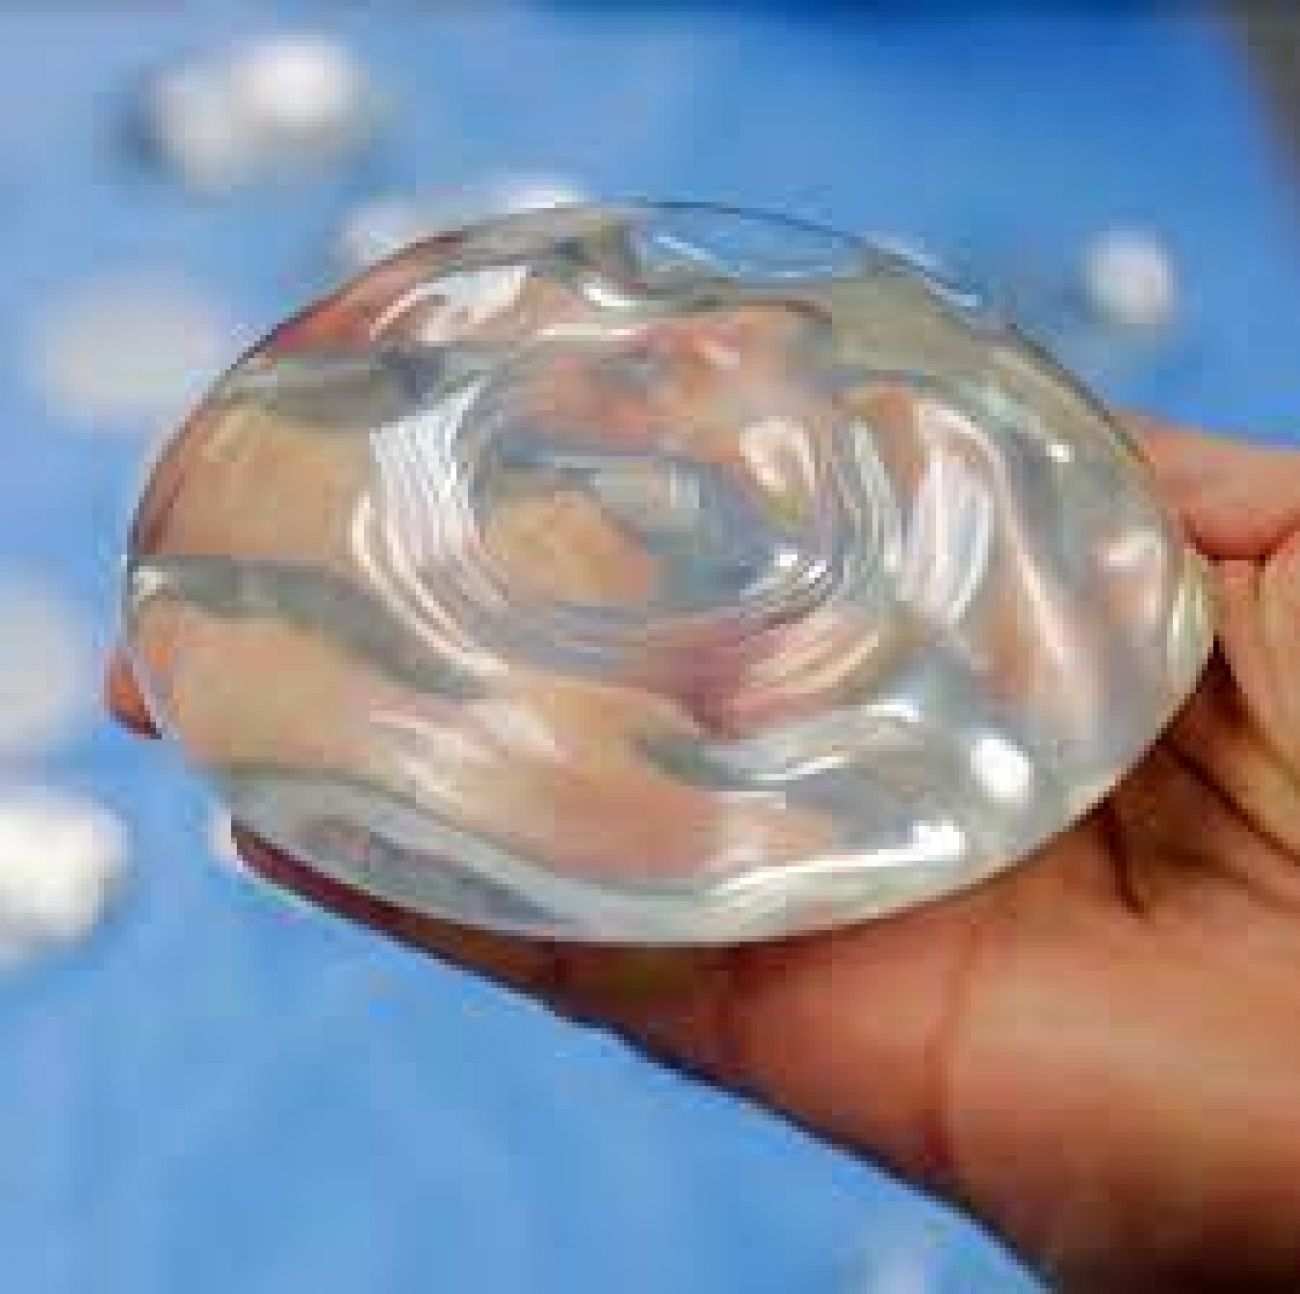 Breast implants linked to new cancer